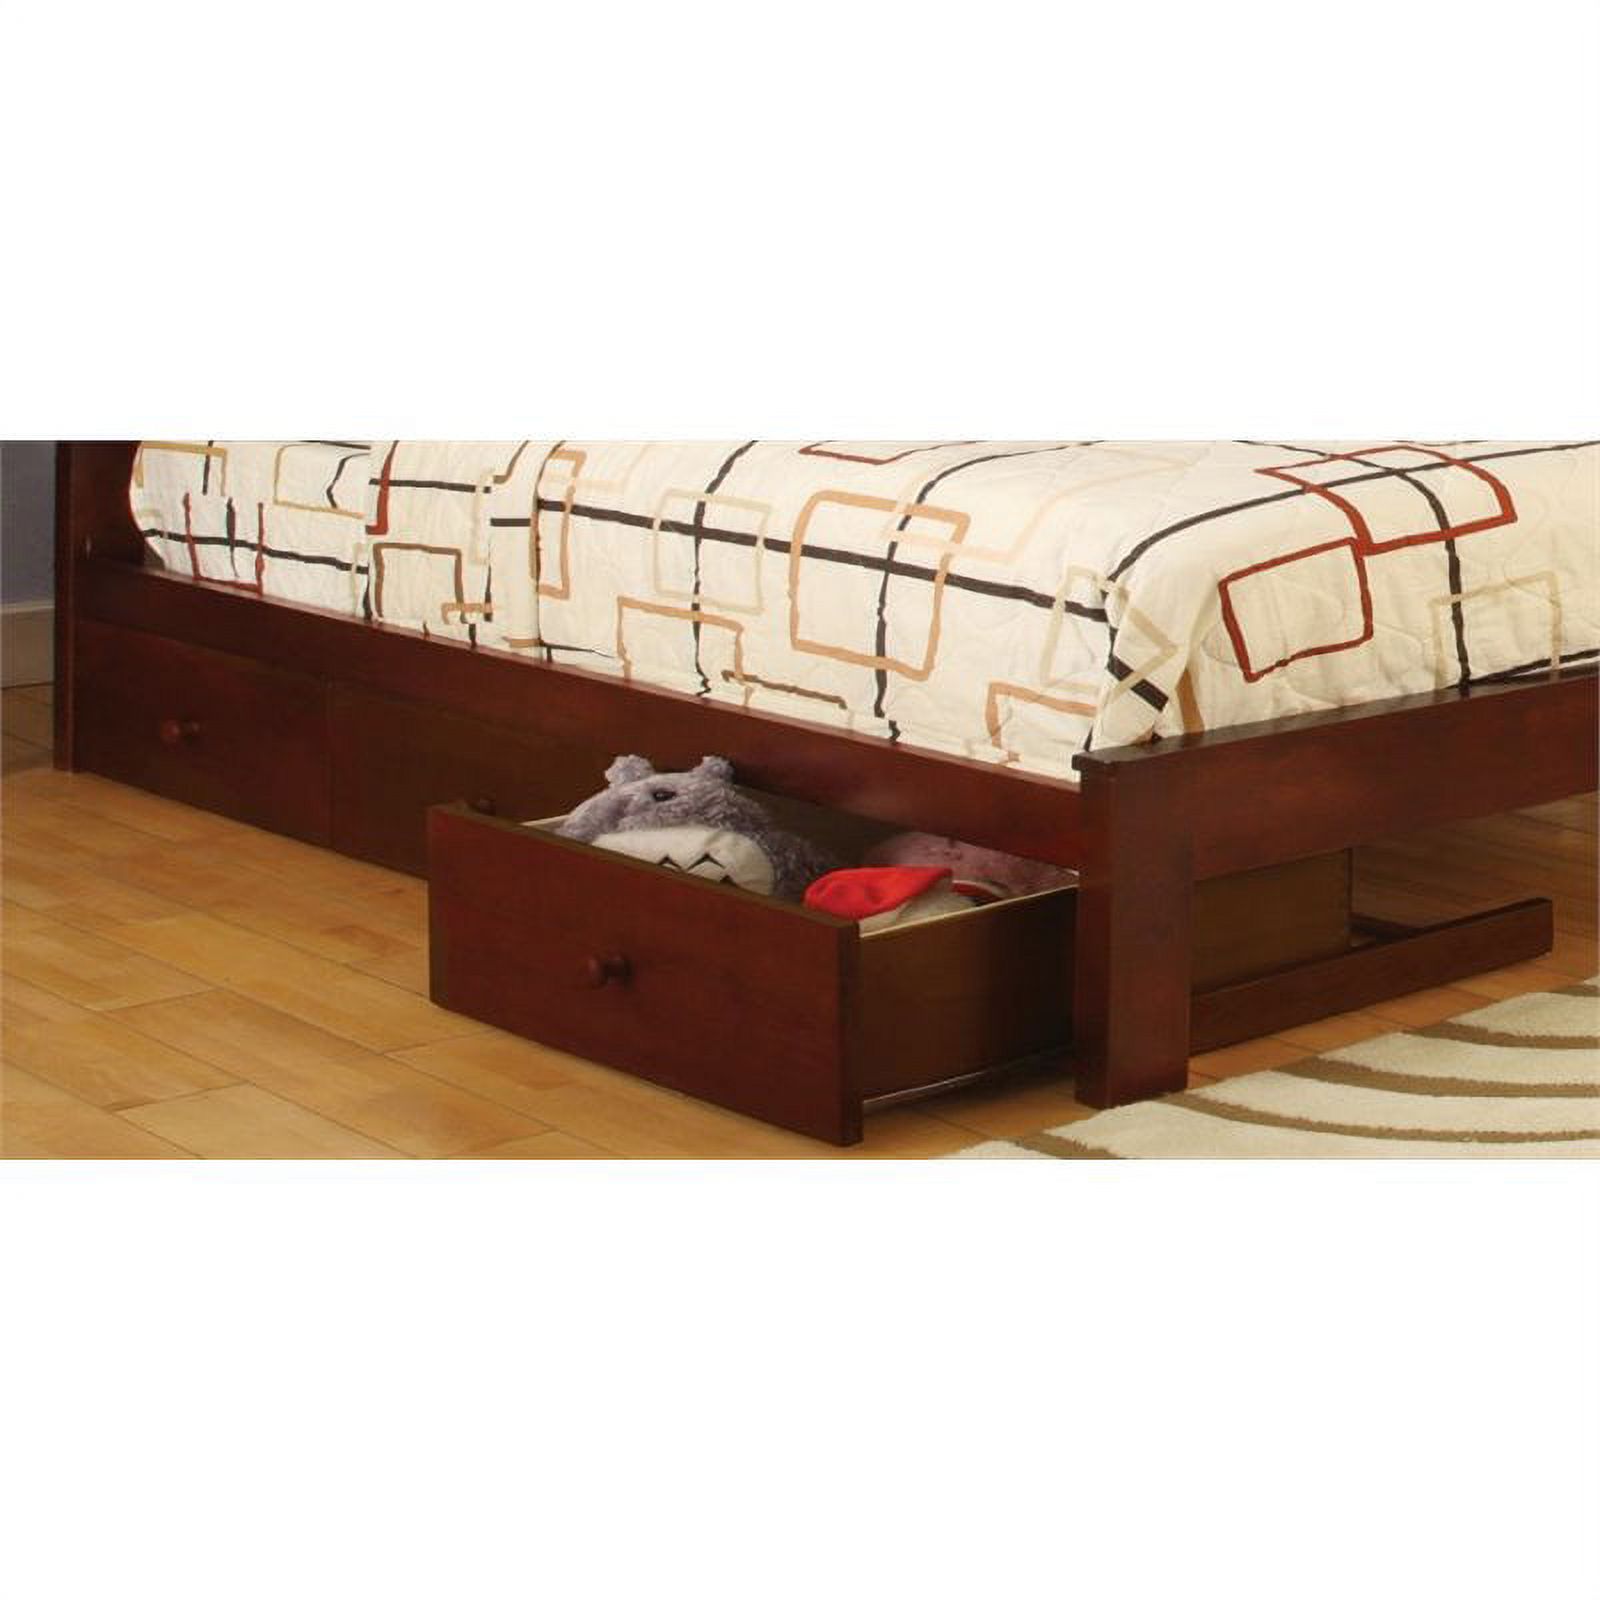 Furniture of America Gosney Cottage Wood Underbed Drawers in Cherry (Set of 3) - image 3 of 4